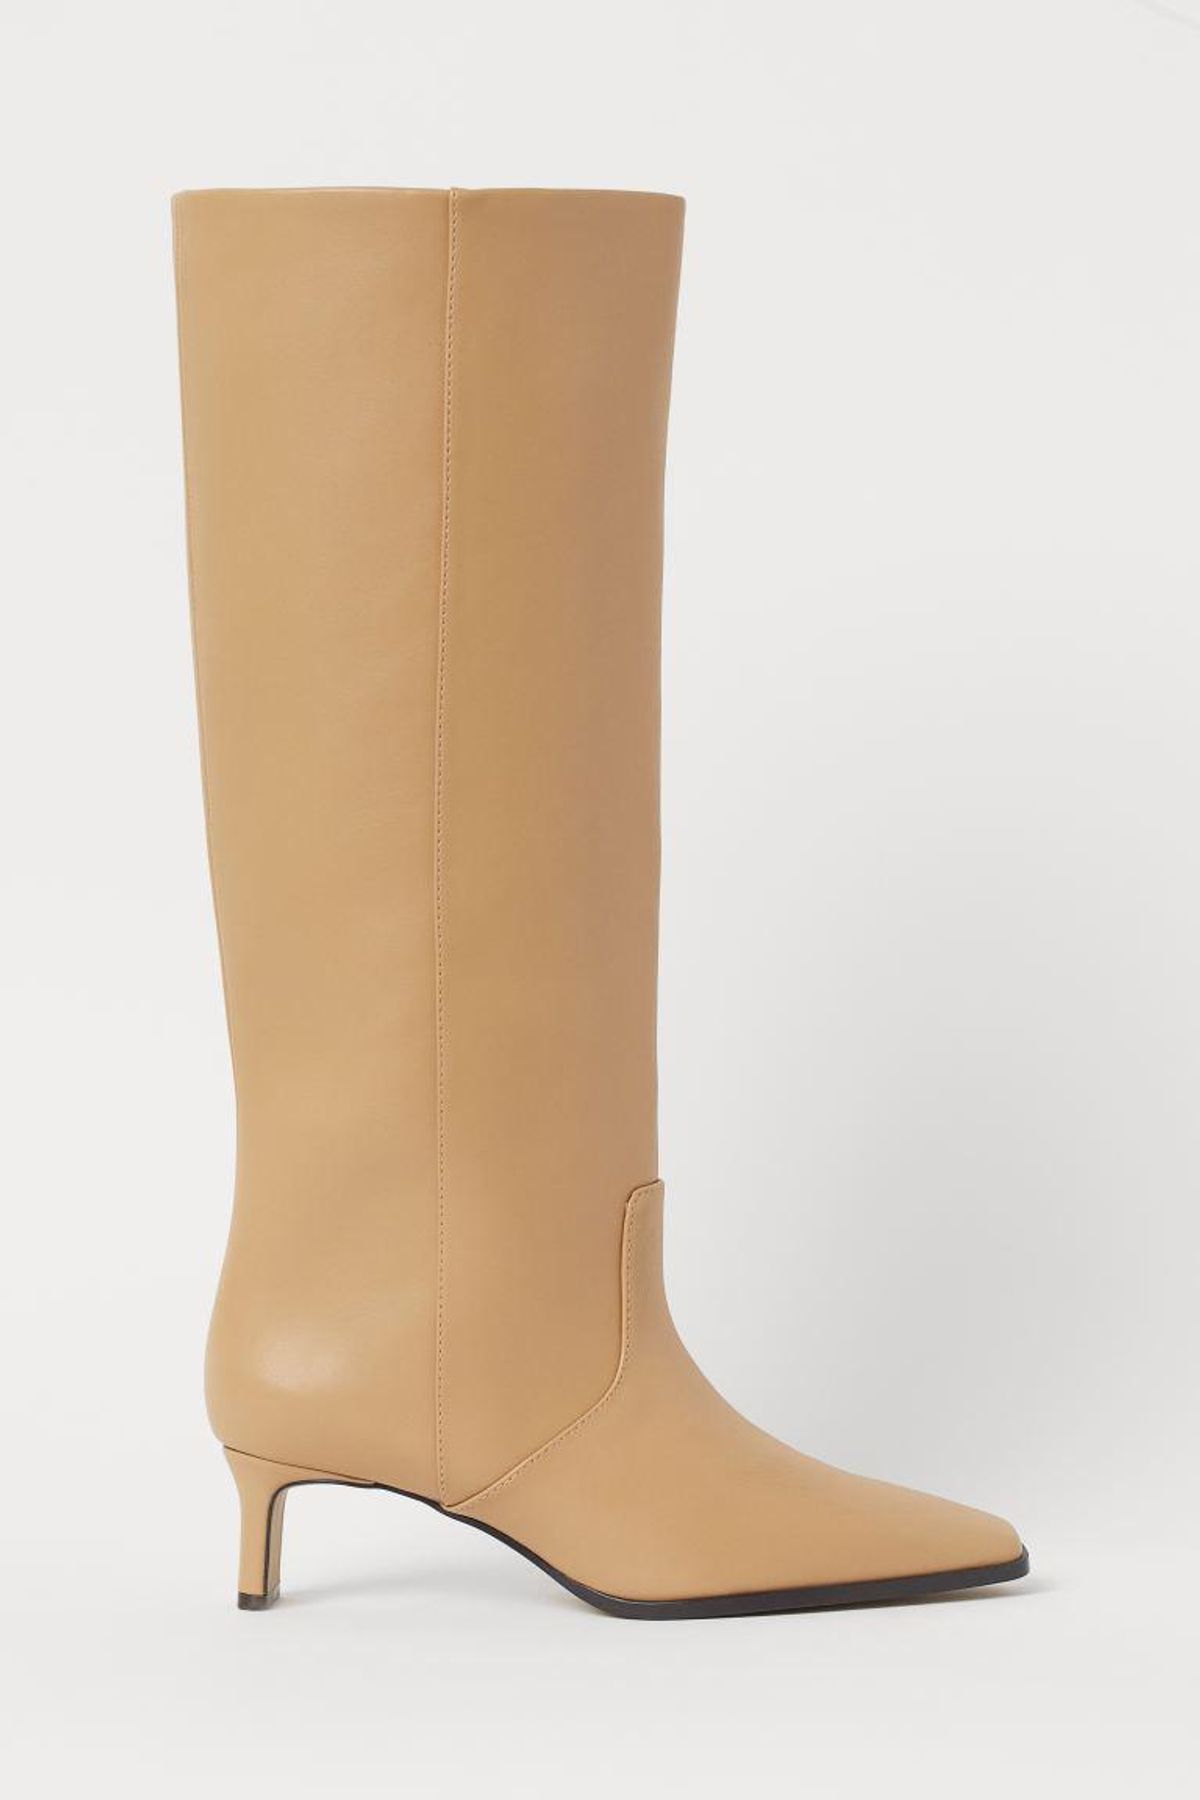 h&m tall boots